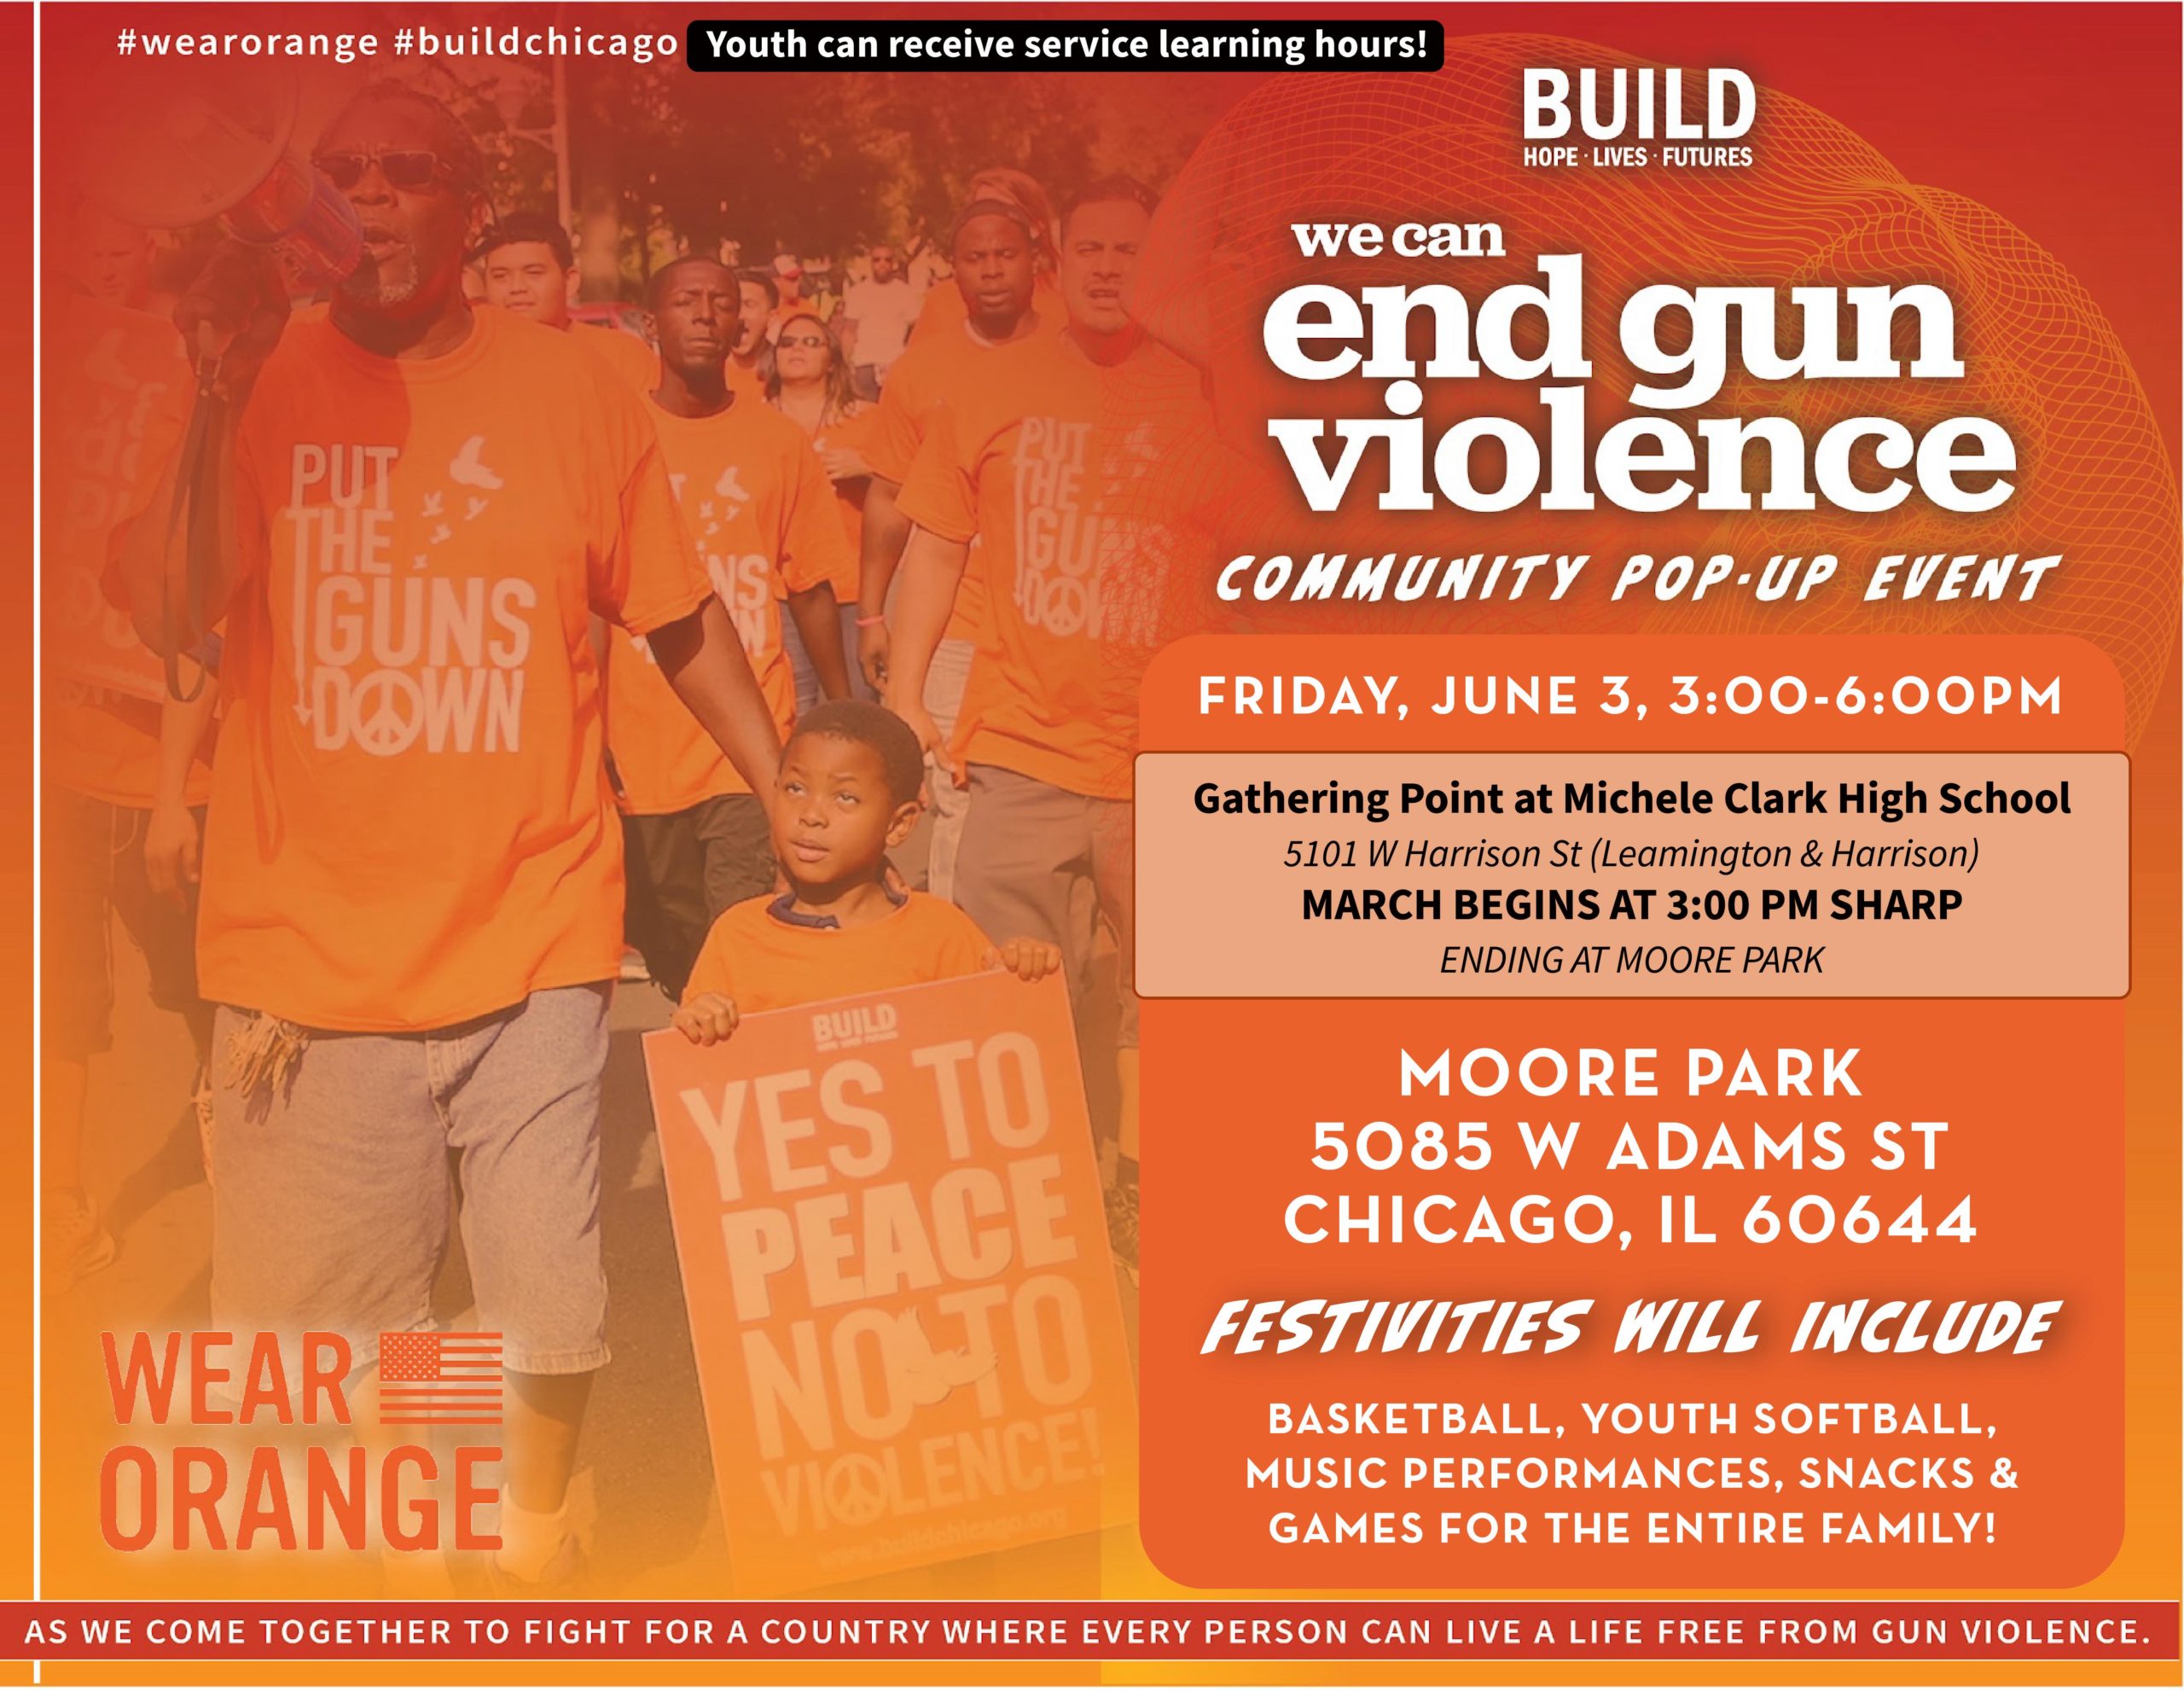 Wear Orange Day March and Community PopUp Event BUILD, Inc.